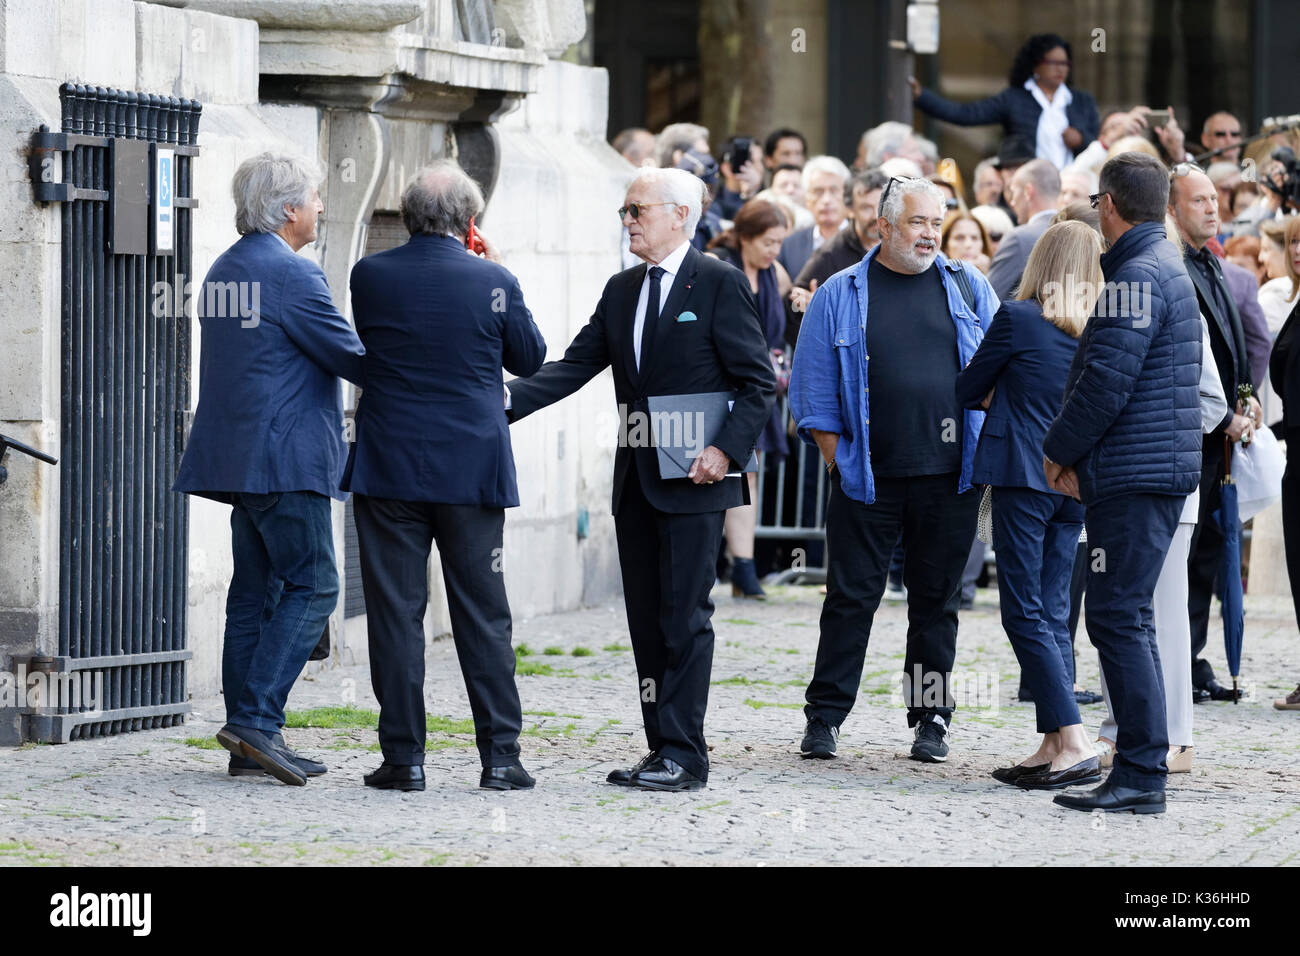 Paris, France. 1st September, 2017. Philippe Labro attends the Mireille Darc's funeral at the Saint-Sulpice church on 1st September, 2017 in Paris, France. Credit: Bernard Menigault/Alamy Live News Stock Photo